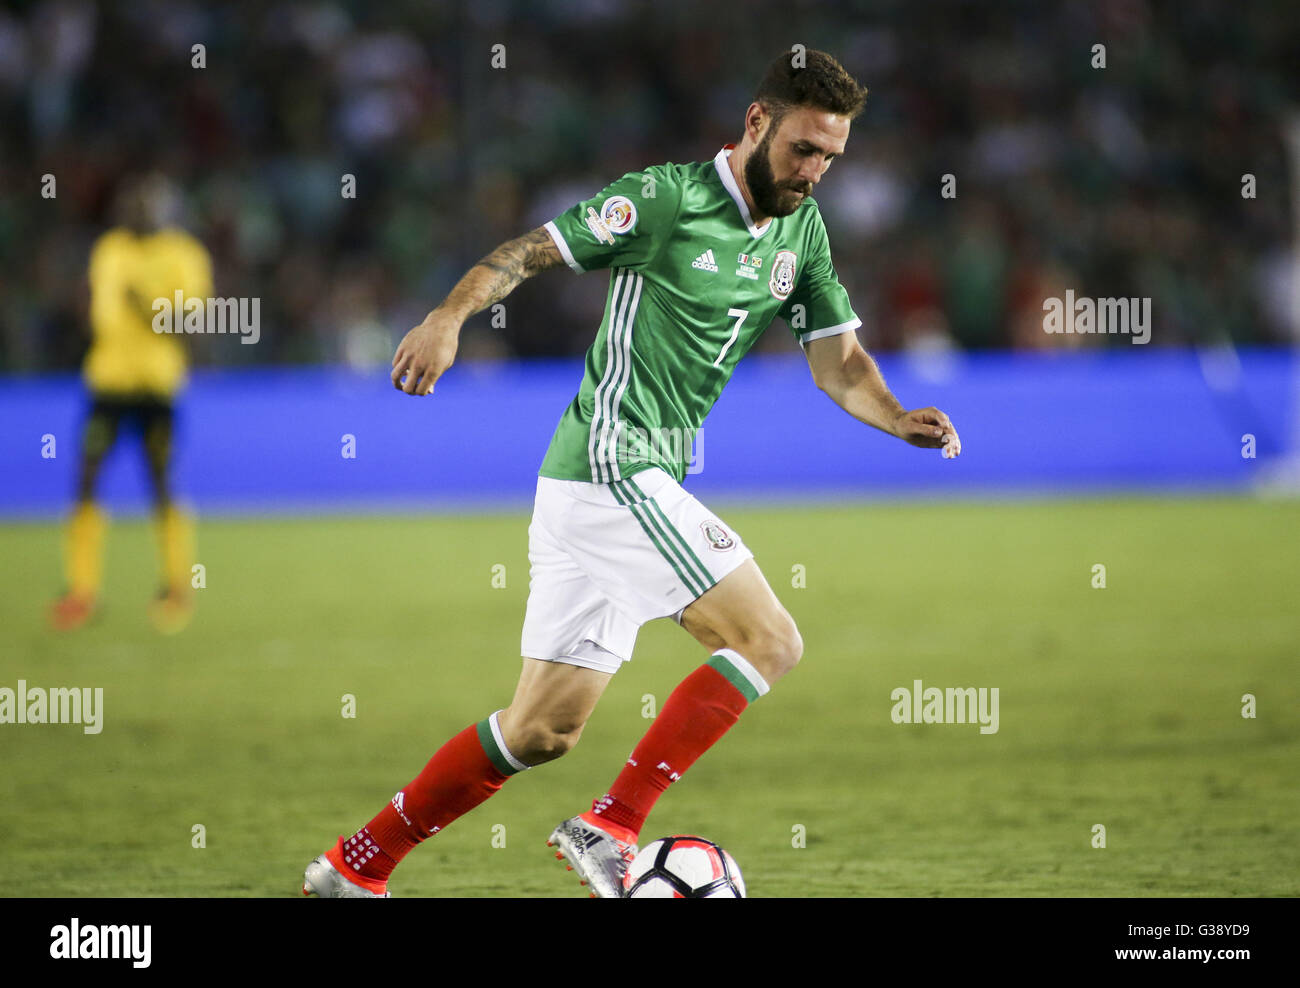 Los Angeles, California, USA. 9th June, 2016. Mexico defender Miguel Layun #7 in a Copa America soccer match between Mexico and ÃŠJamaica of Group C at the Rose Bowl in Pasadena, California, June 9, 2016. Mexico won 2-0. Credit:  Ringo Chiu/ZUMA Wire/Alamy Live News Stock Photo